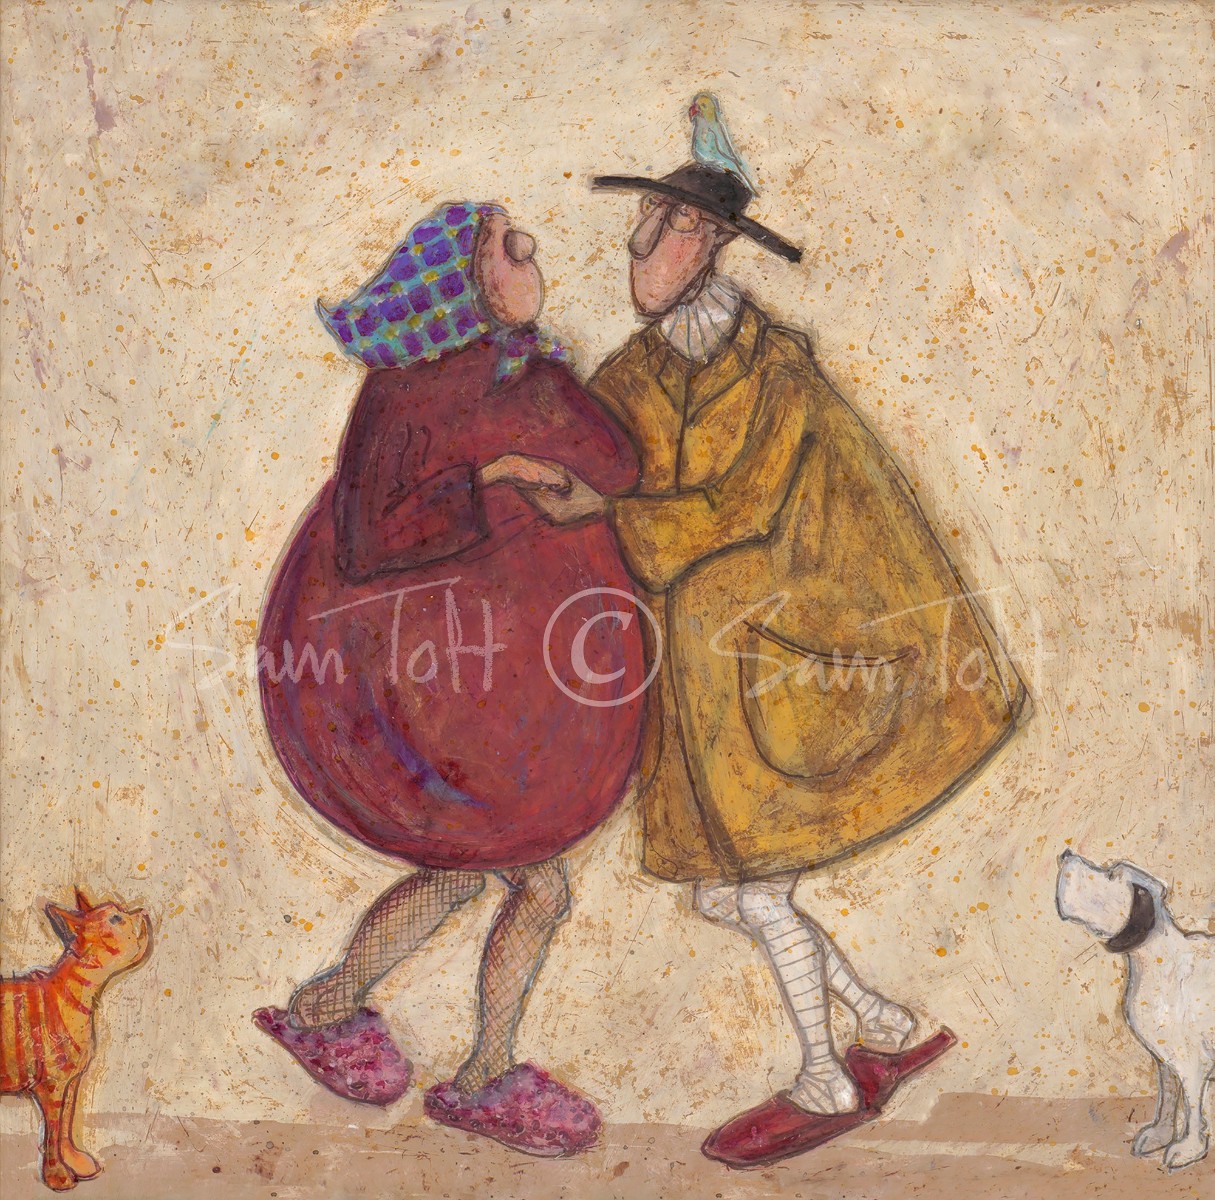 Dancing in our Slippers by Sam Toft